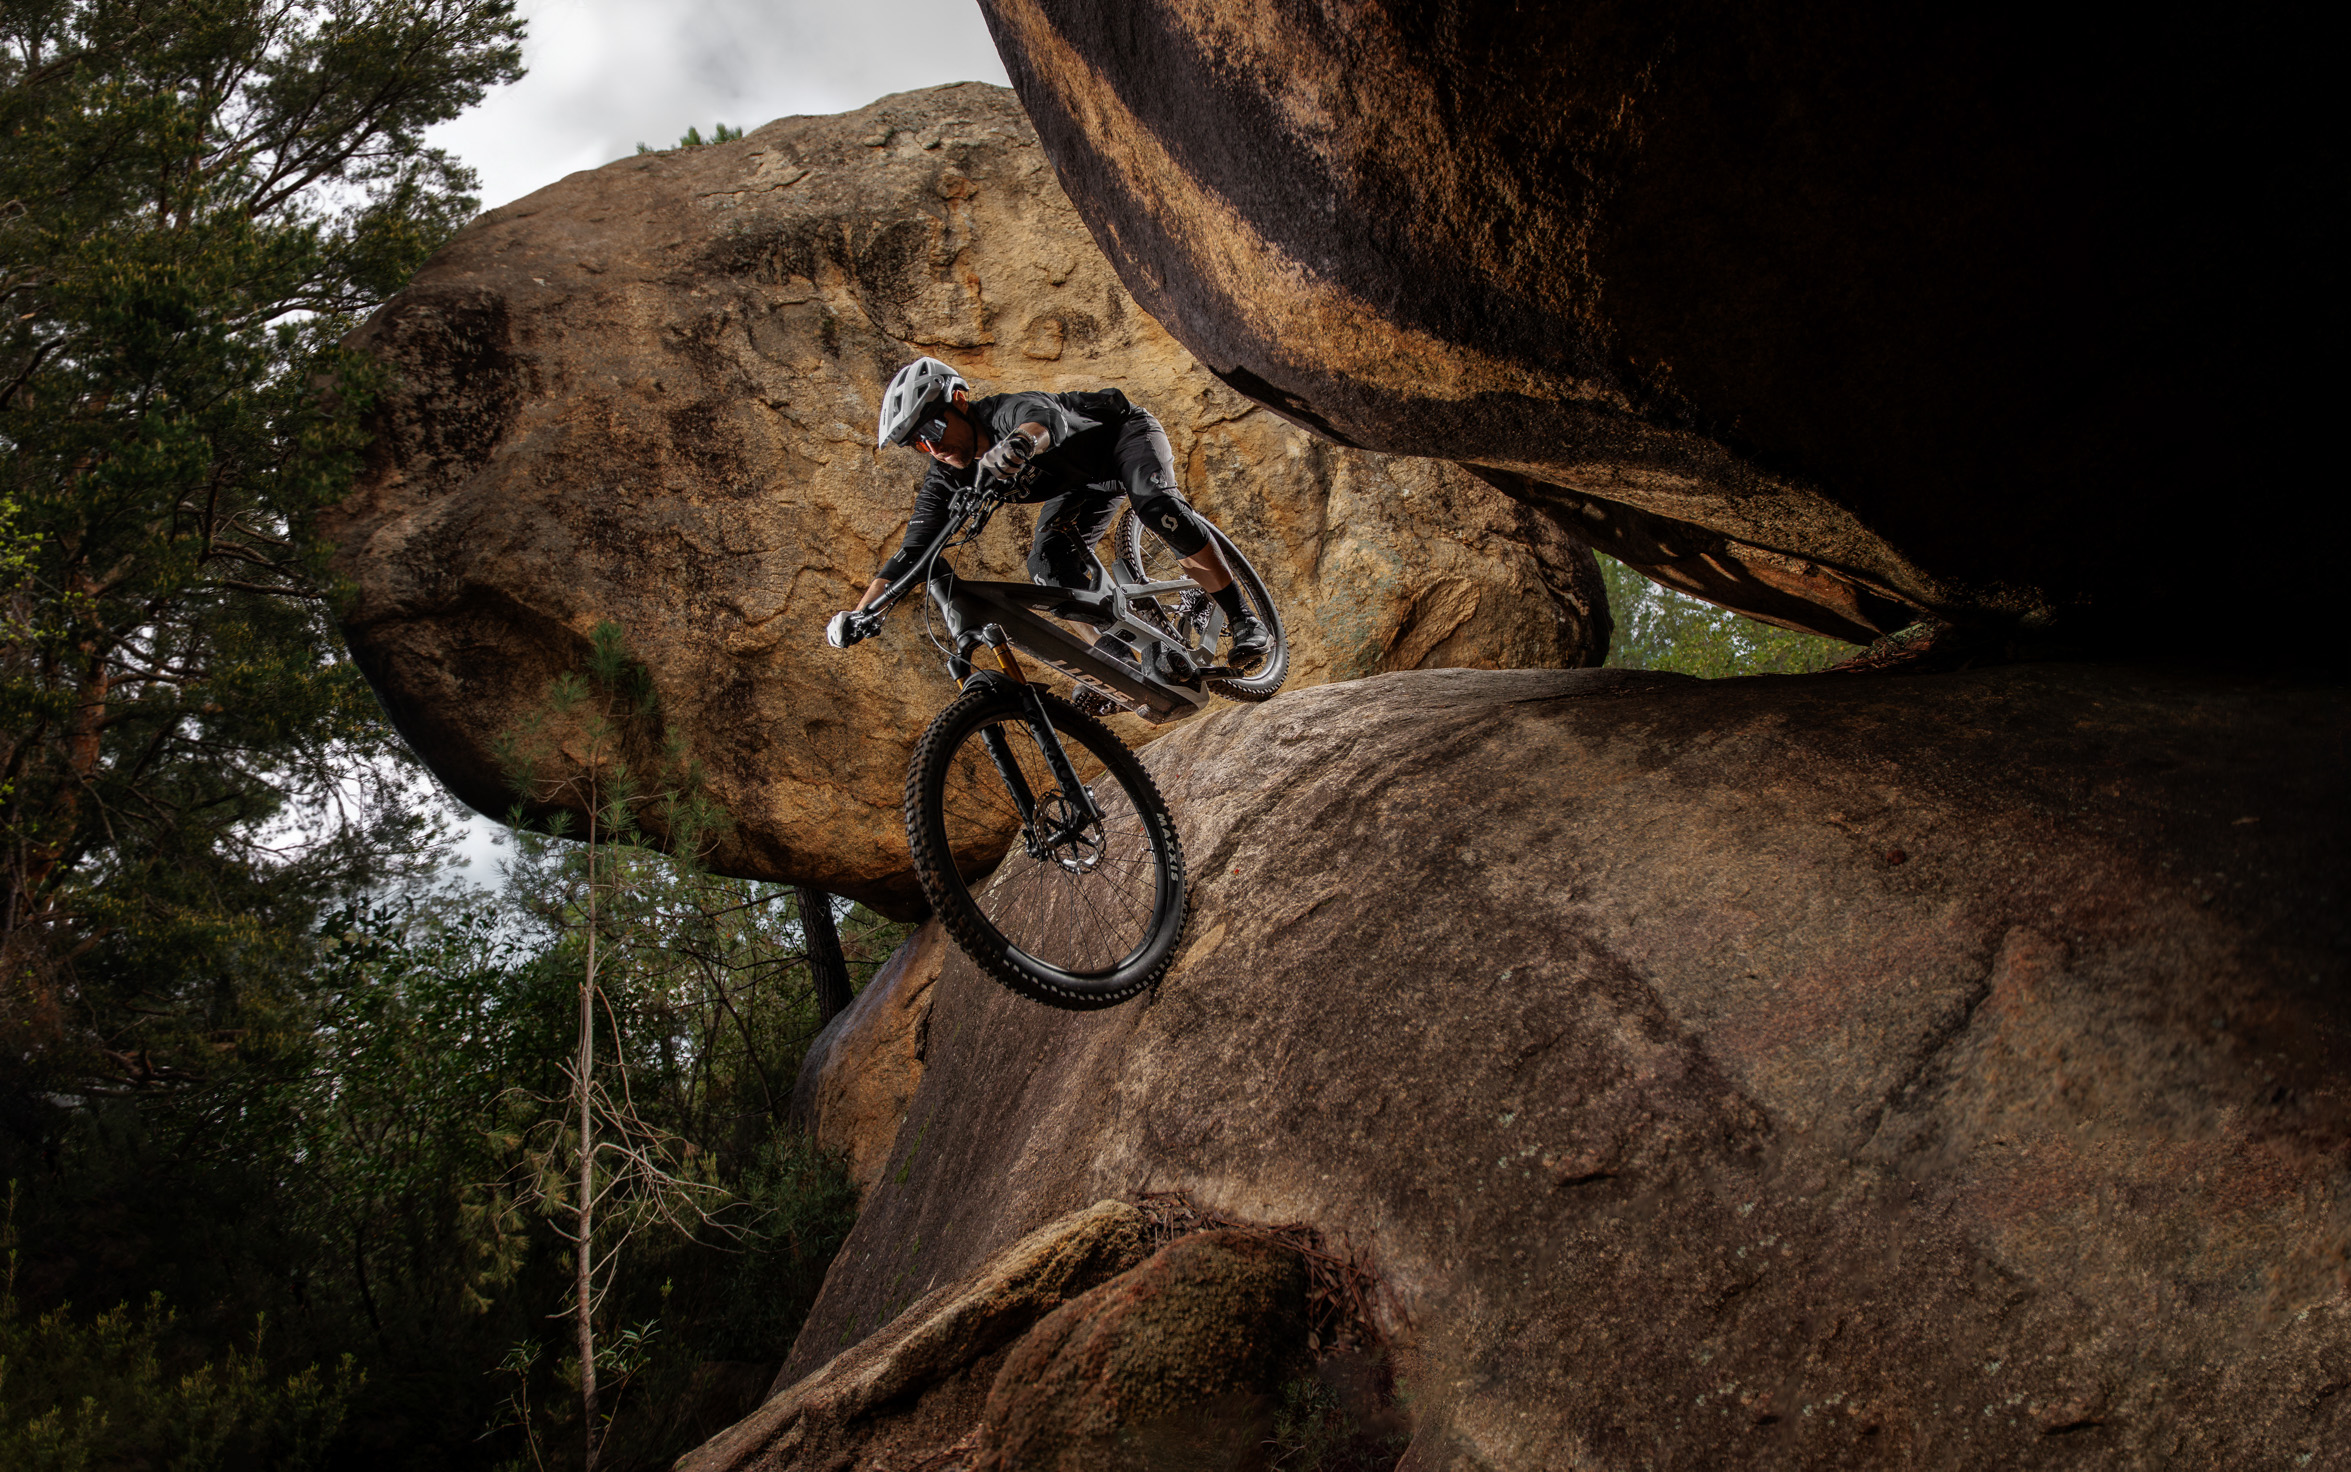 Mountain biker launches down a rock, two huge rounded rocks hanging over. It's an extreme image